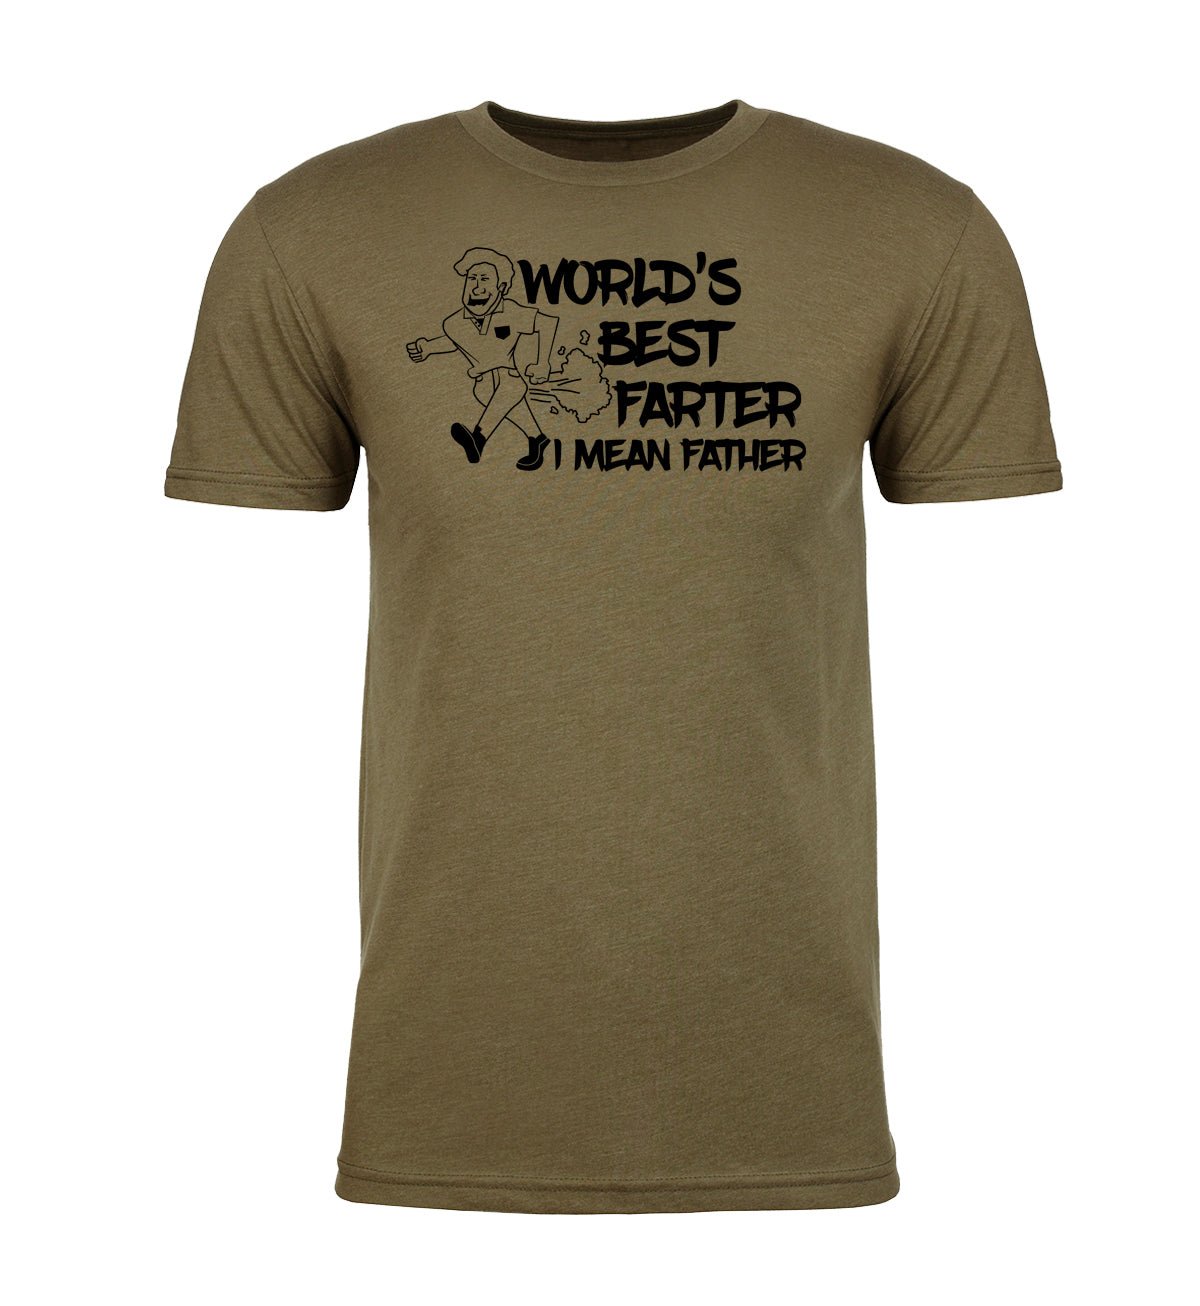 World's Best Farter - I Mean Father Unisex T Shirts - Mato & Hash